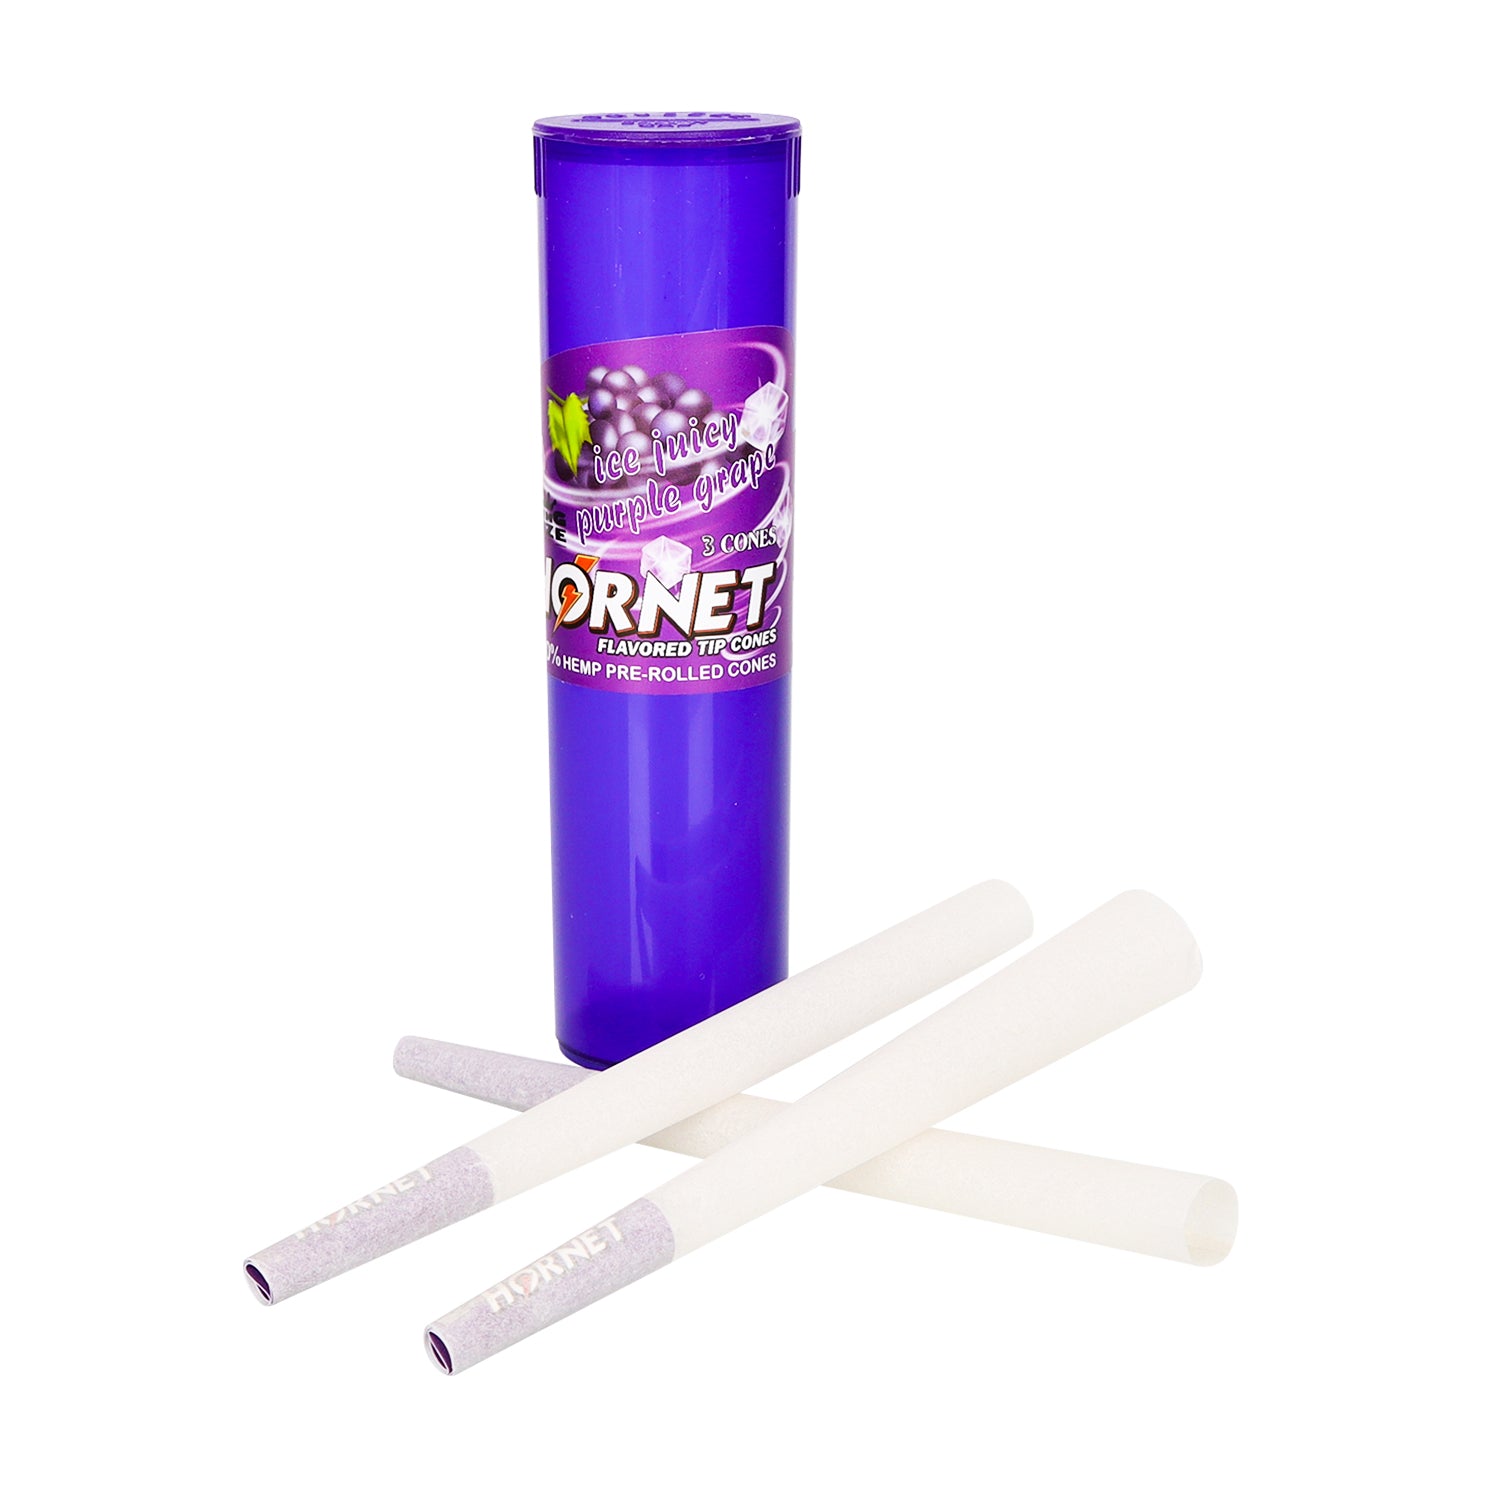 HORNET Grape Flavors Pre Rolled Cones, King Size Pre Rolled Rolling Paper With Tips, Slow Burning Rolling Cones & Flavored Pop, 3 PCS / Tube, 12 Tubes / Box